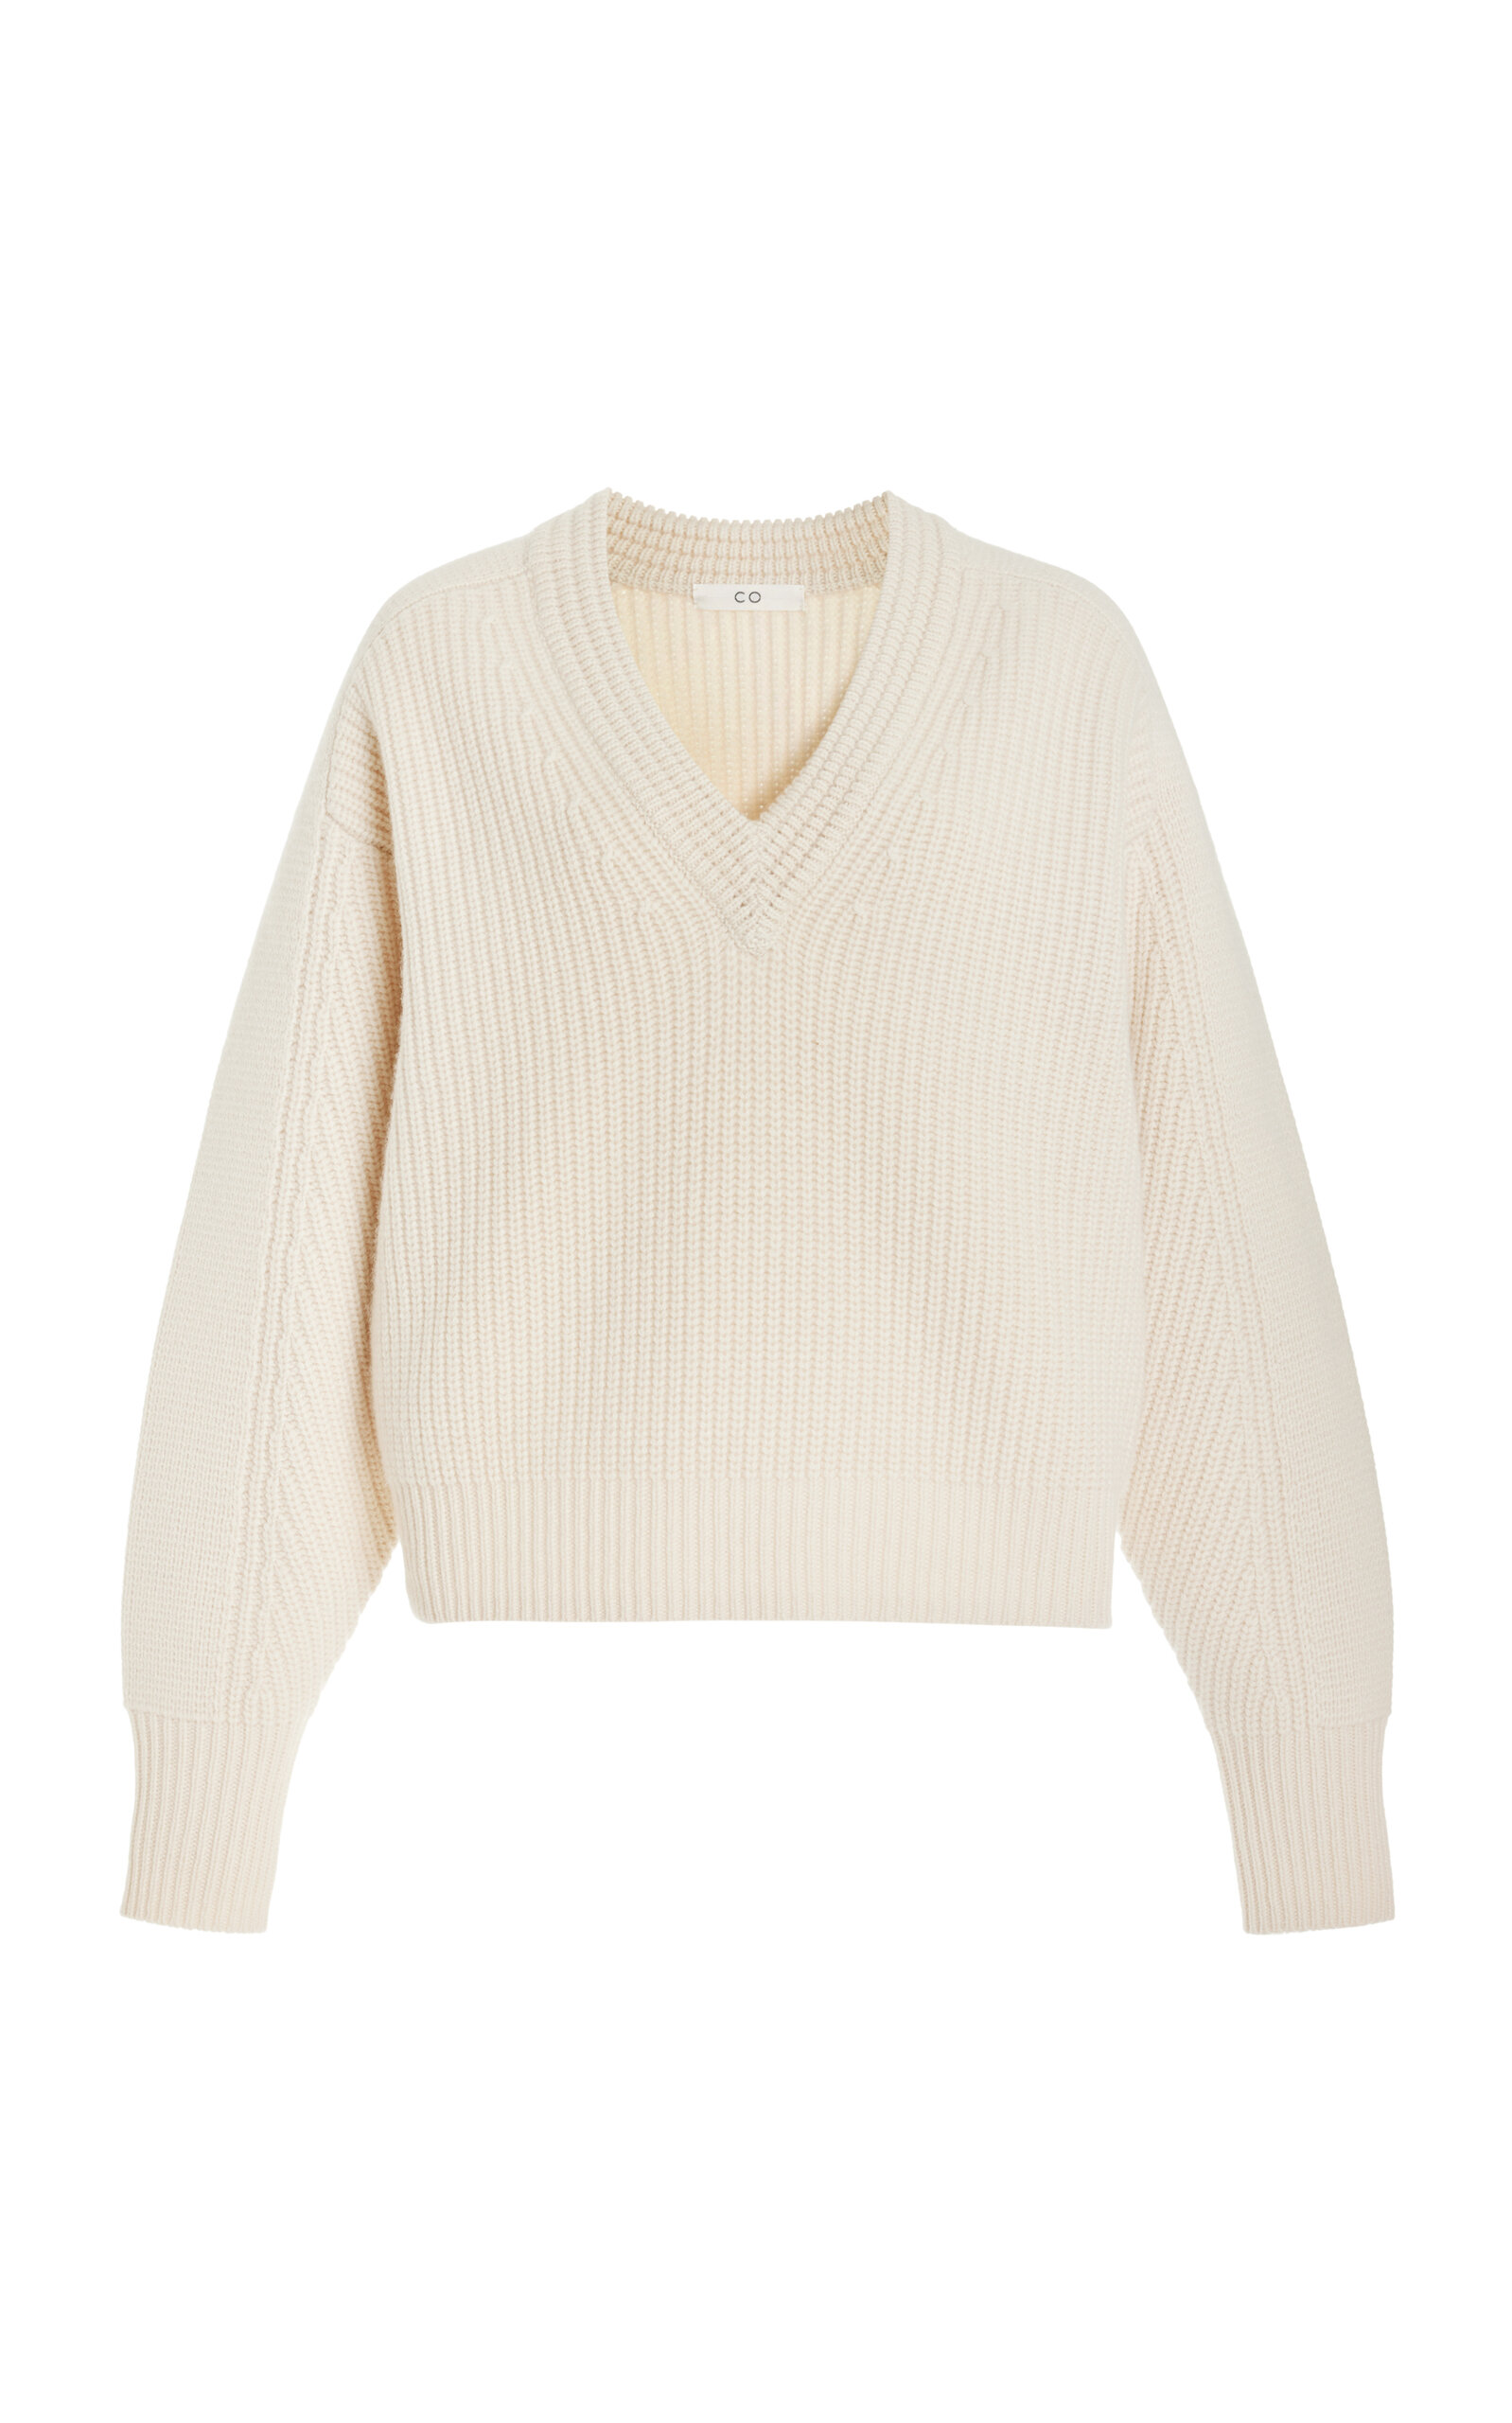 Shop Co Knit Cashmere Sweater In Ivory